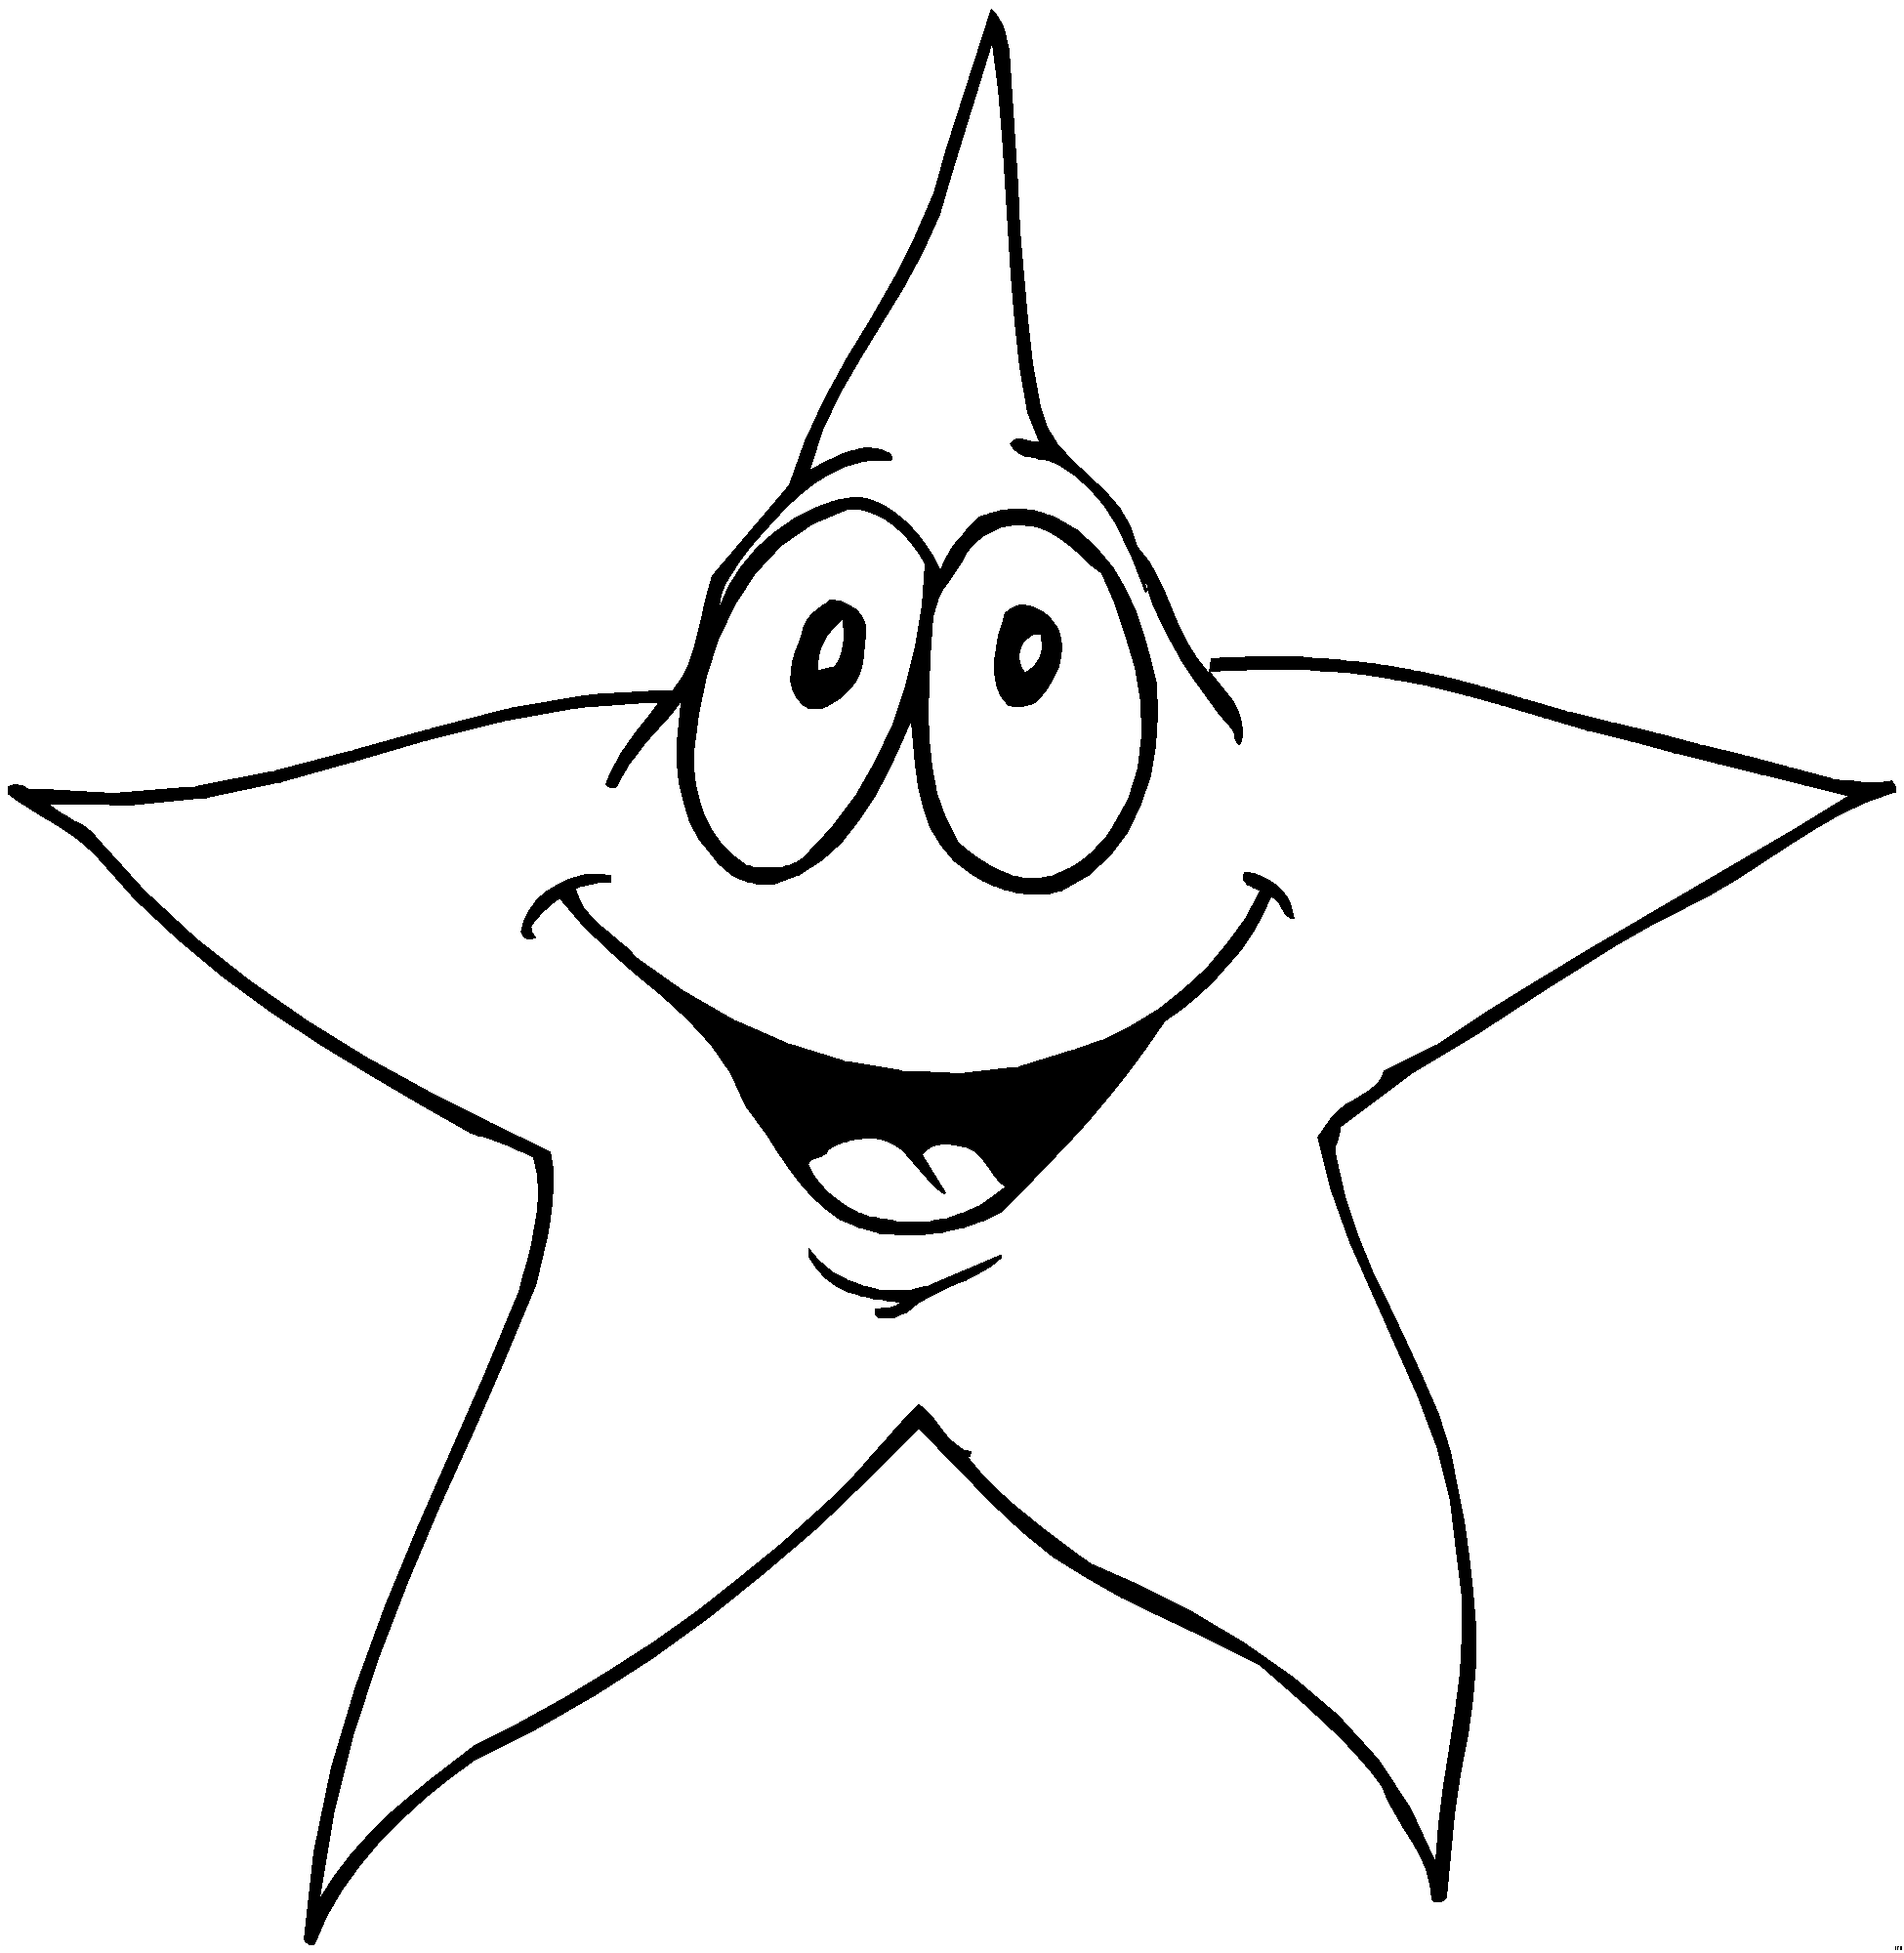  Star Coloring Pages | Print Coloring Pages